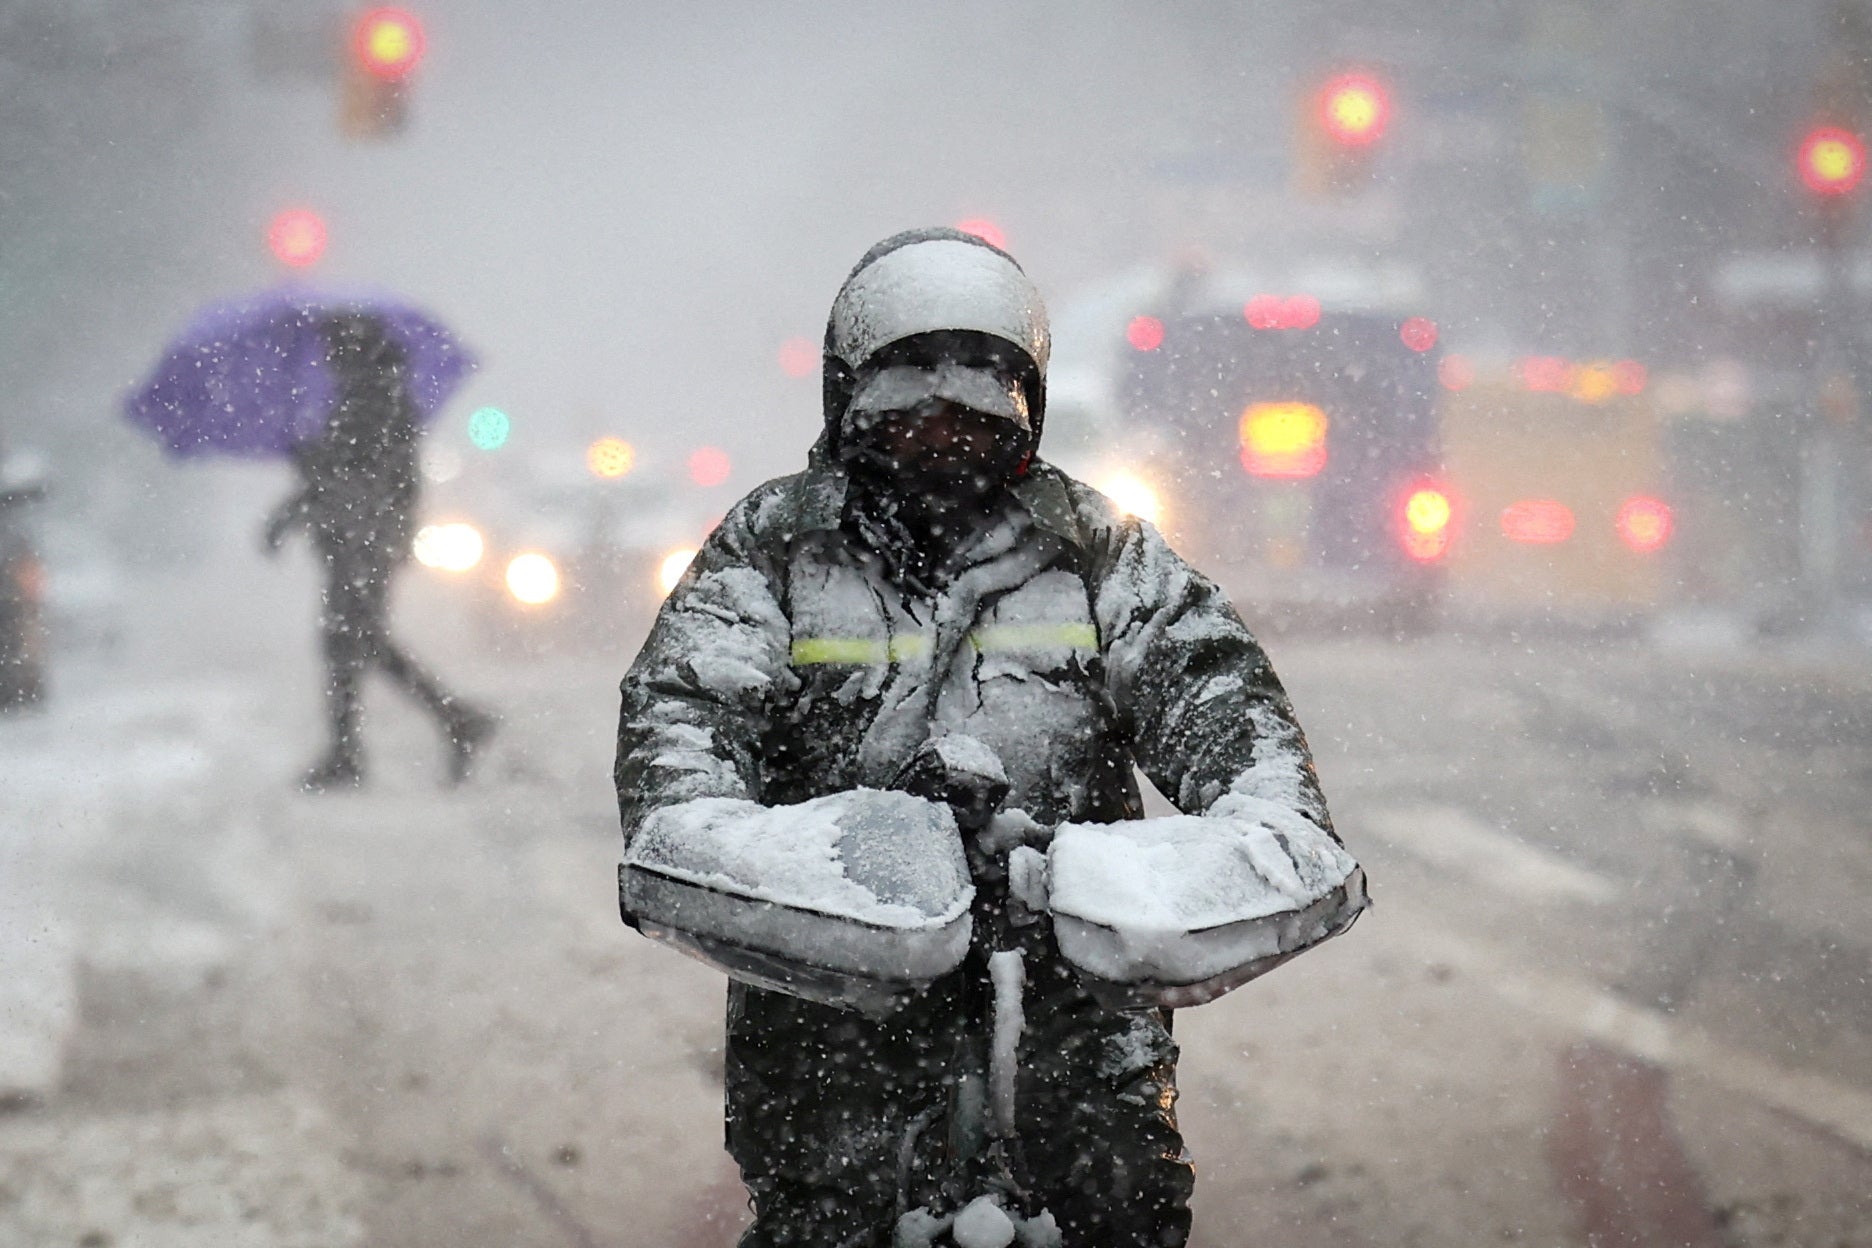 

<p>A delivery worker rides a bicycle on East 125th Street in heavy snowfall</p>
<p>” height=”1248″ width=”1872″ layout=”responsive” i-amphtml-layout=”responsive”><i-amphtml-sizer slot=